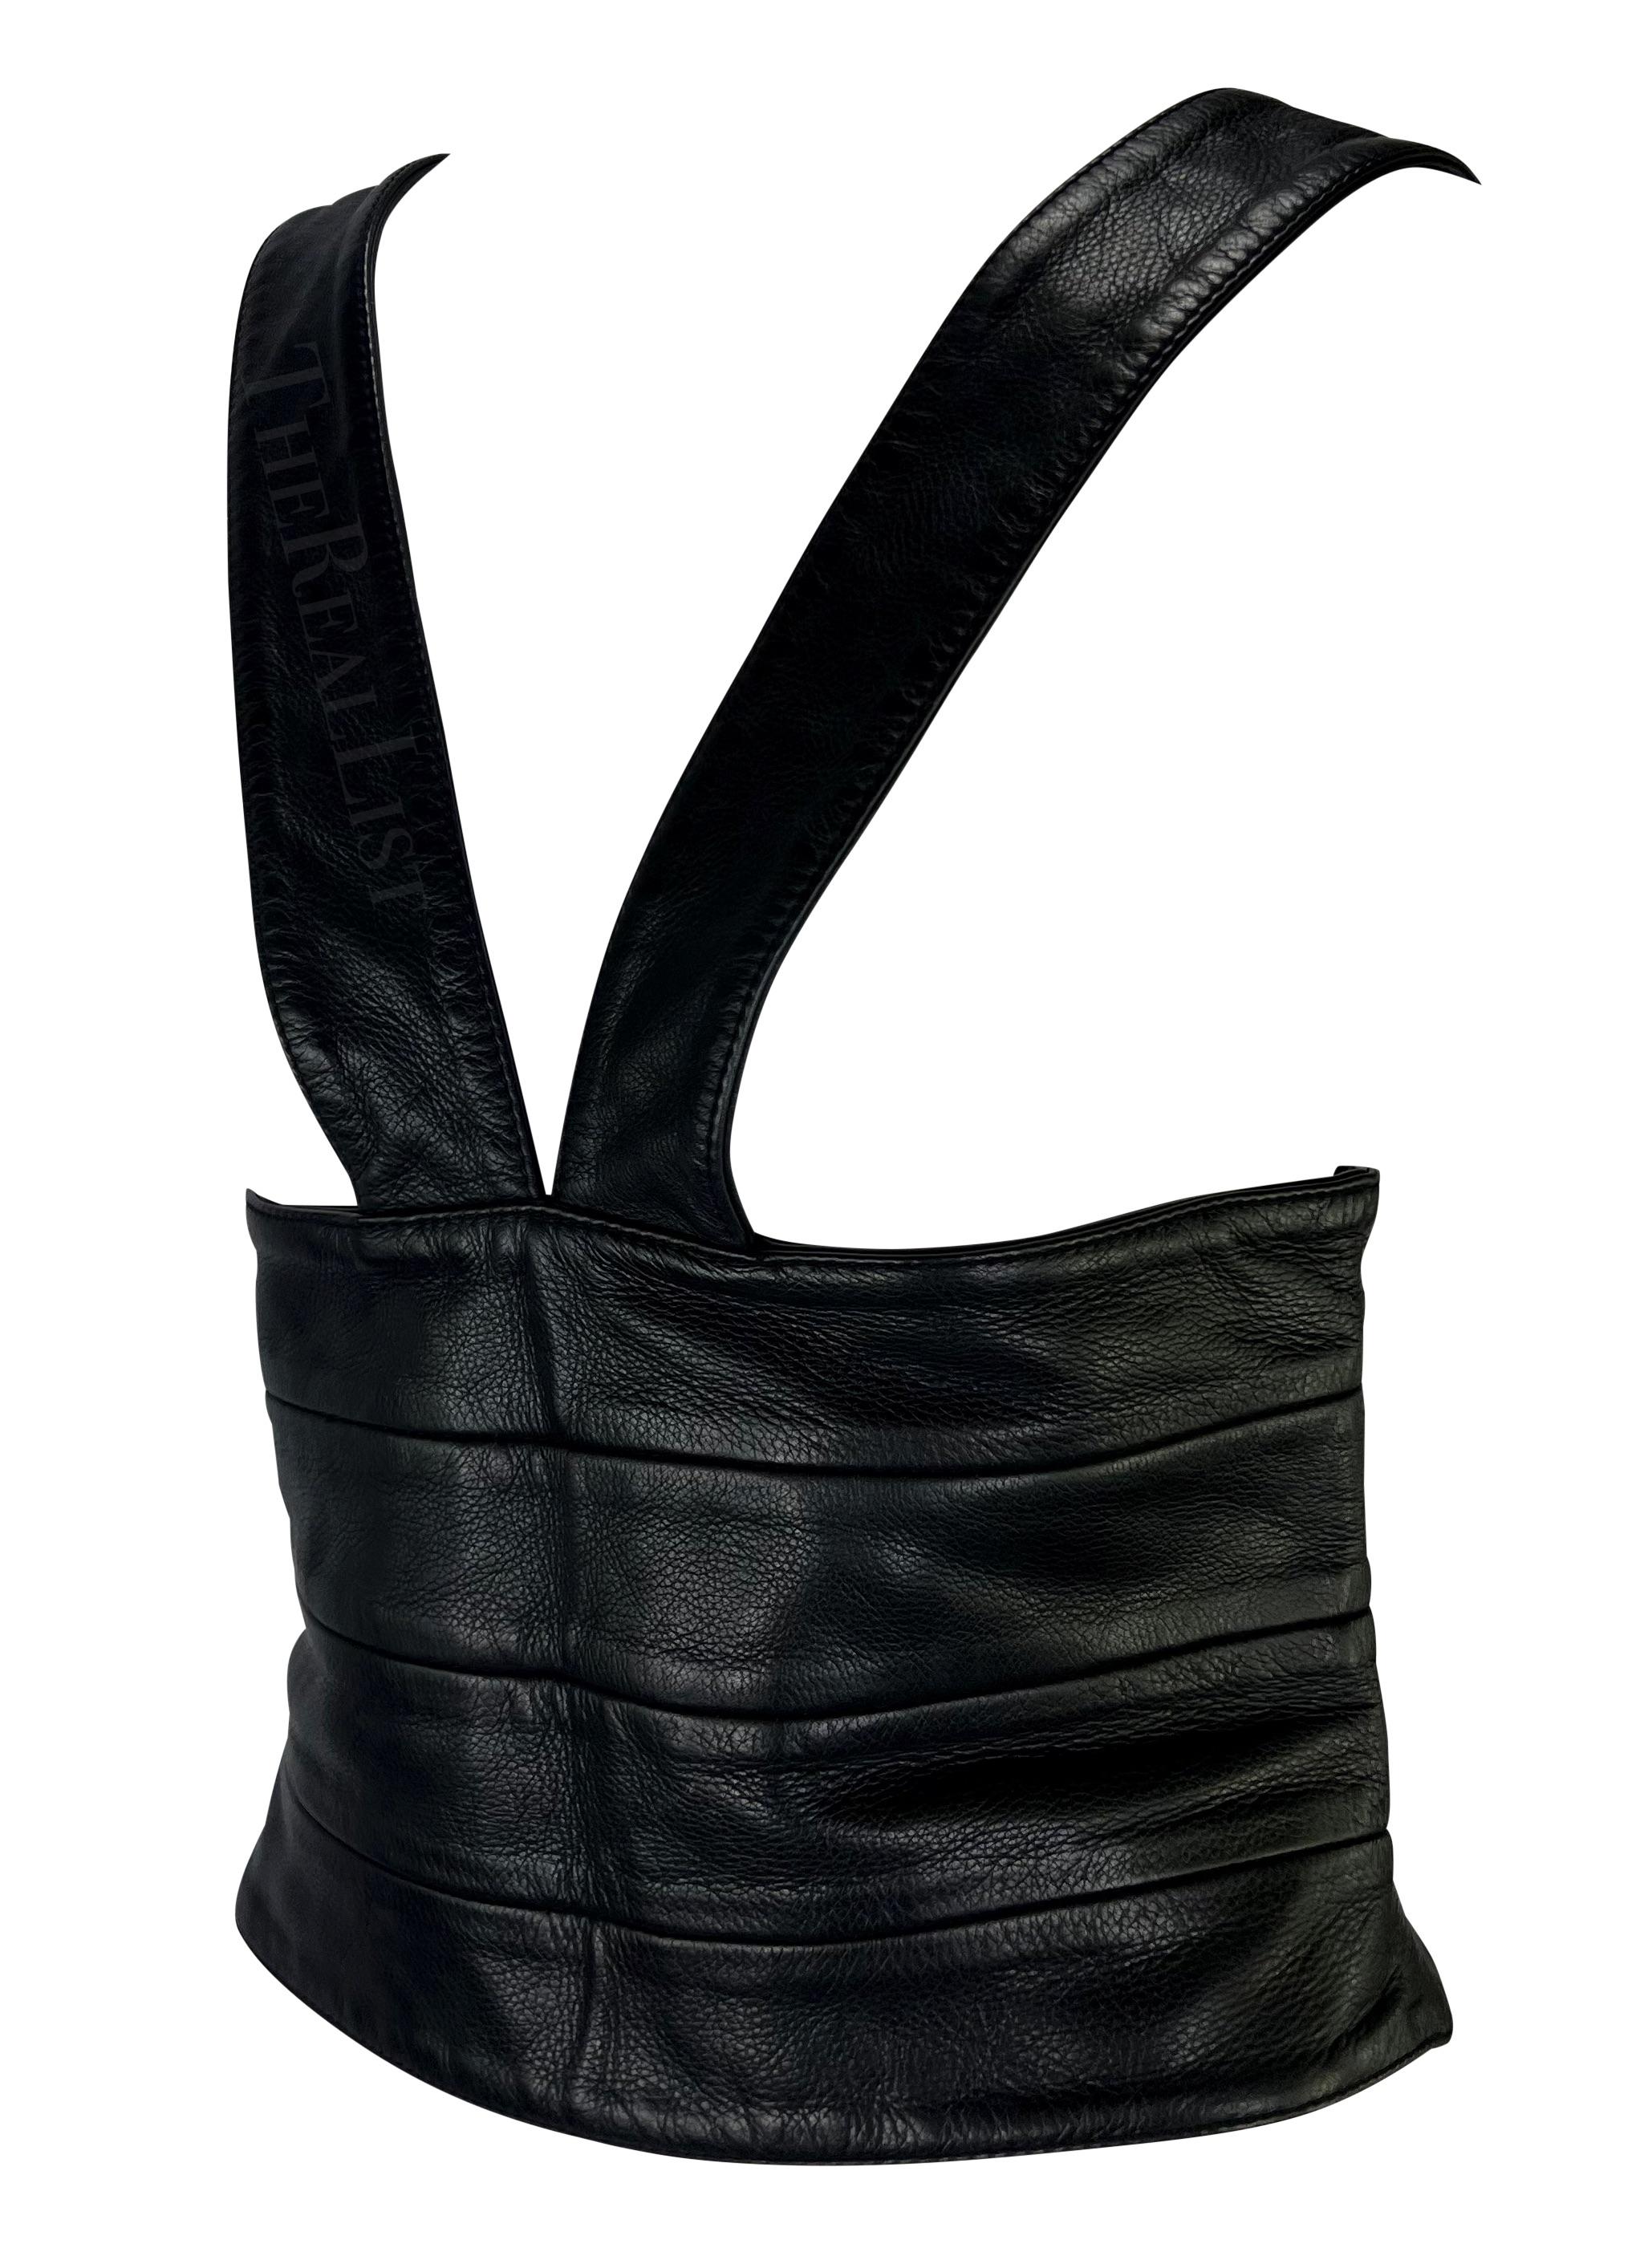 TheRealList presents: a black leather Givenchy cummerbund-style top. From the late 2000s, this men's top is constructed entirely of leather. The top features horizontal leather panels that wrap around the waist, a deep v-neckline, and straps that